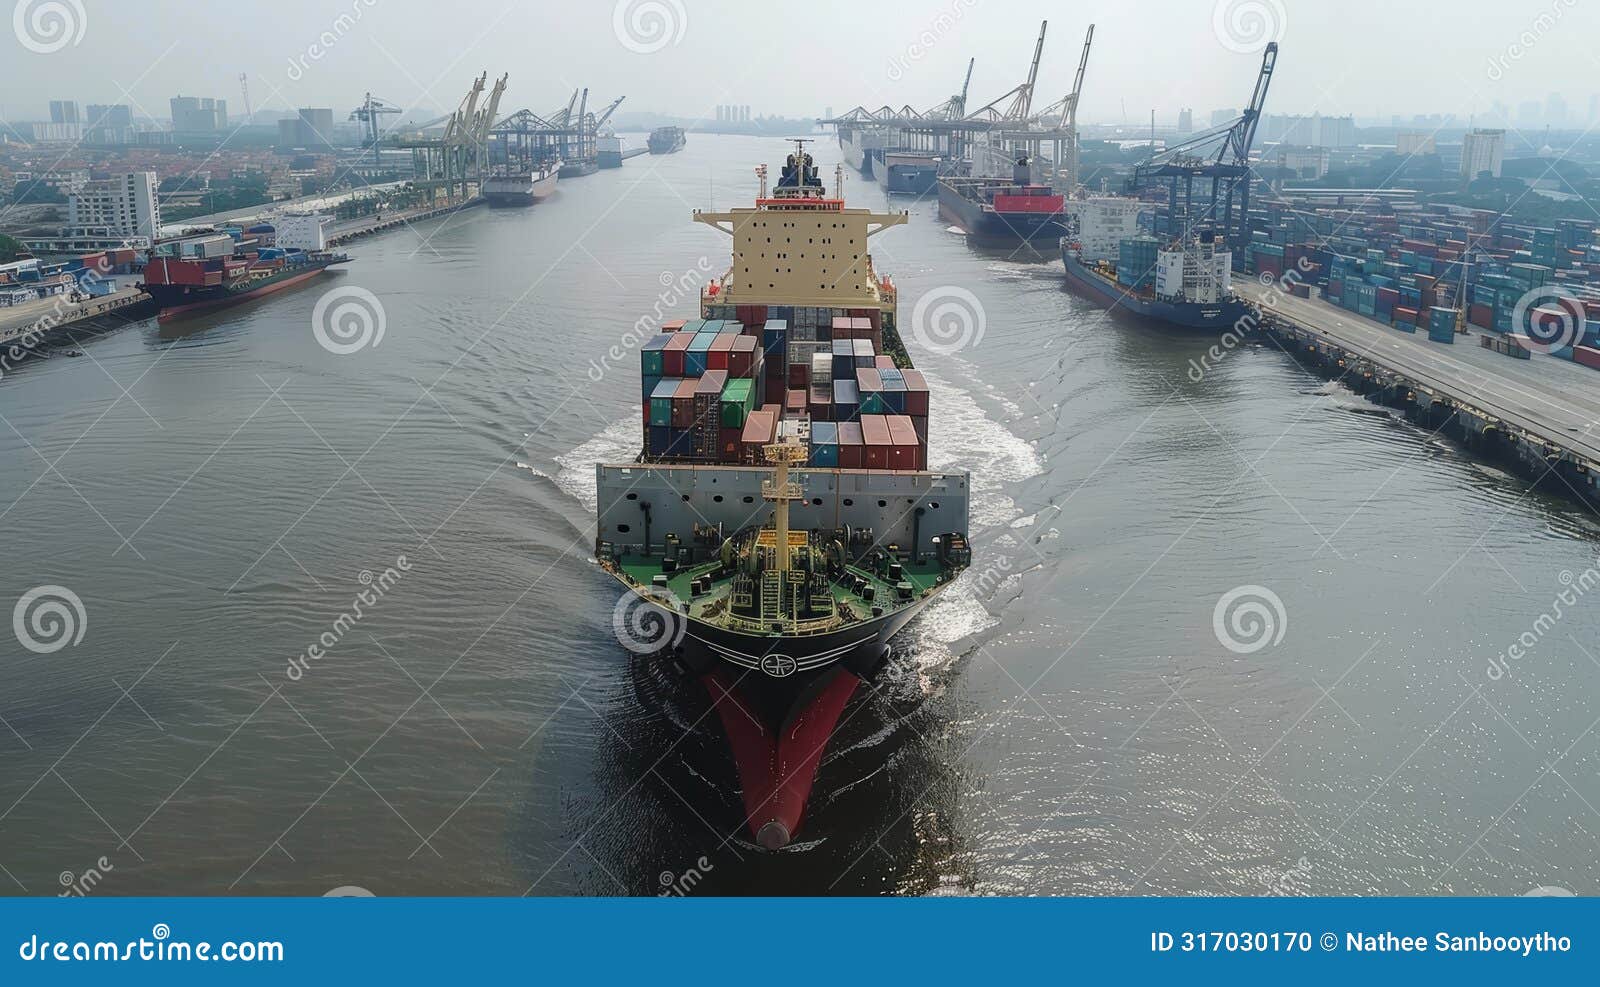 container ship navigating busy cargo port